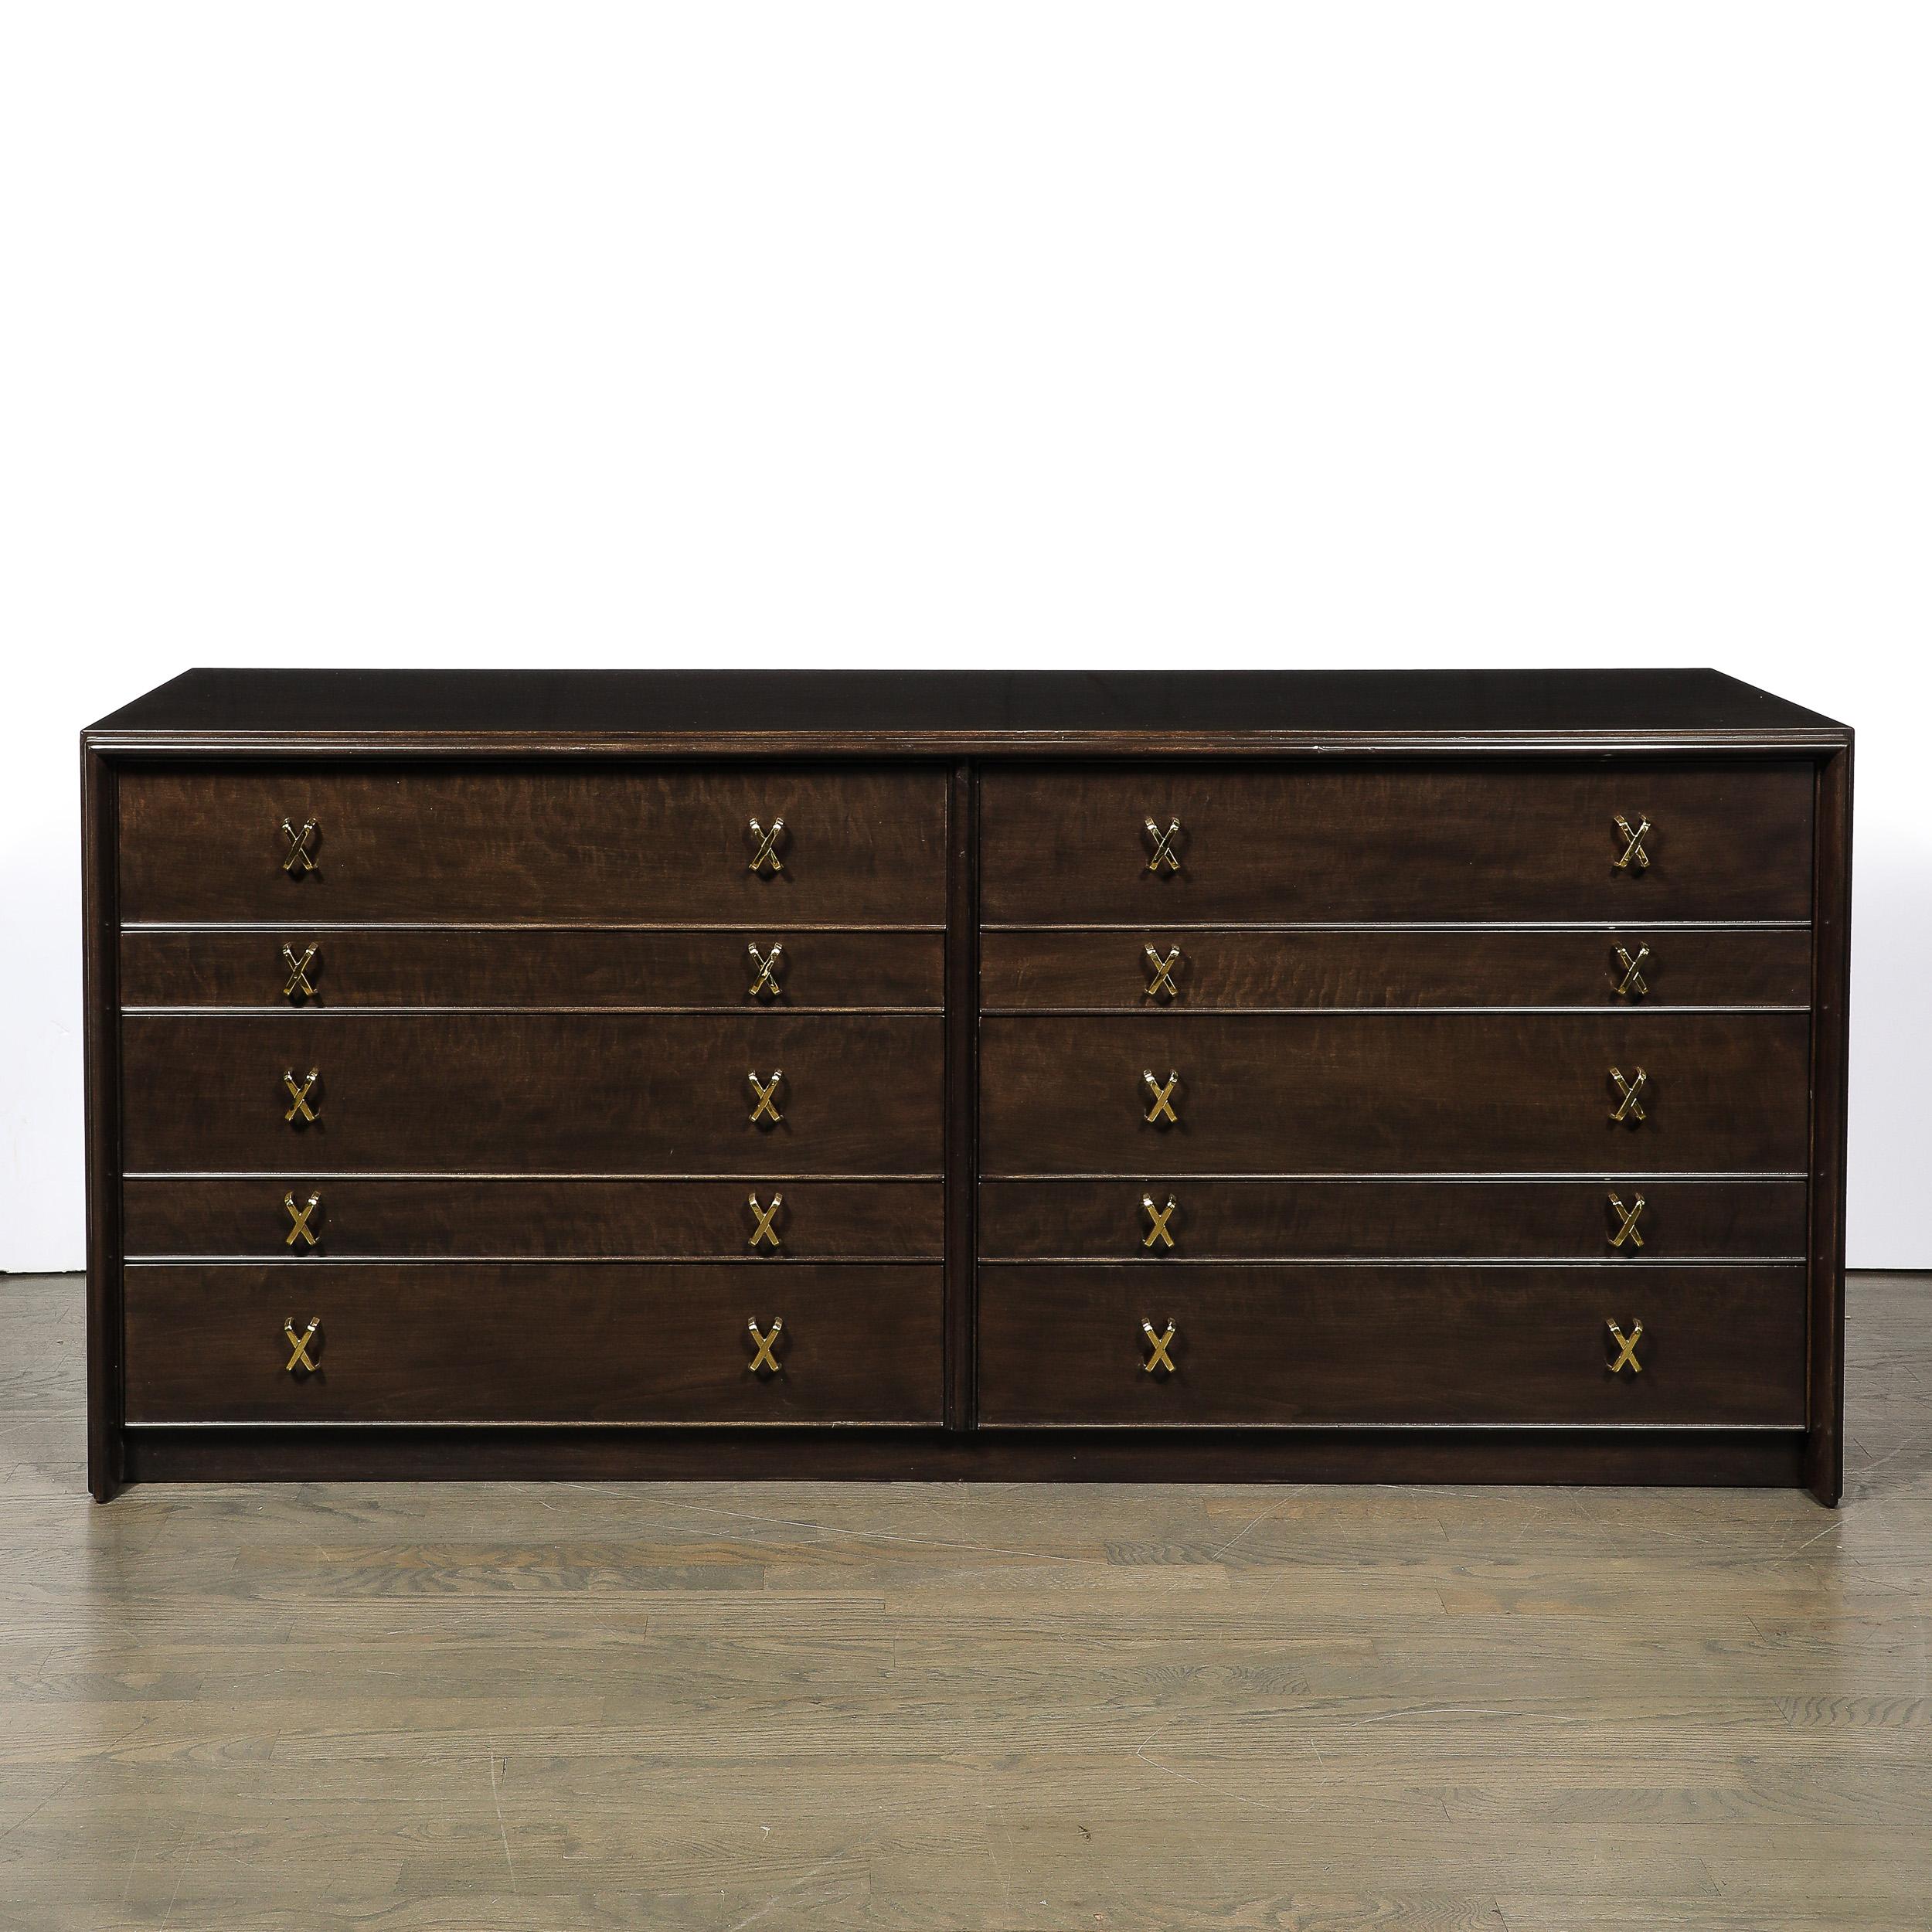 Brass Mid-Century Modernist X Form Low Chest  in Rich Brown Walnut by Paul Frankl For Sale